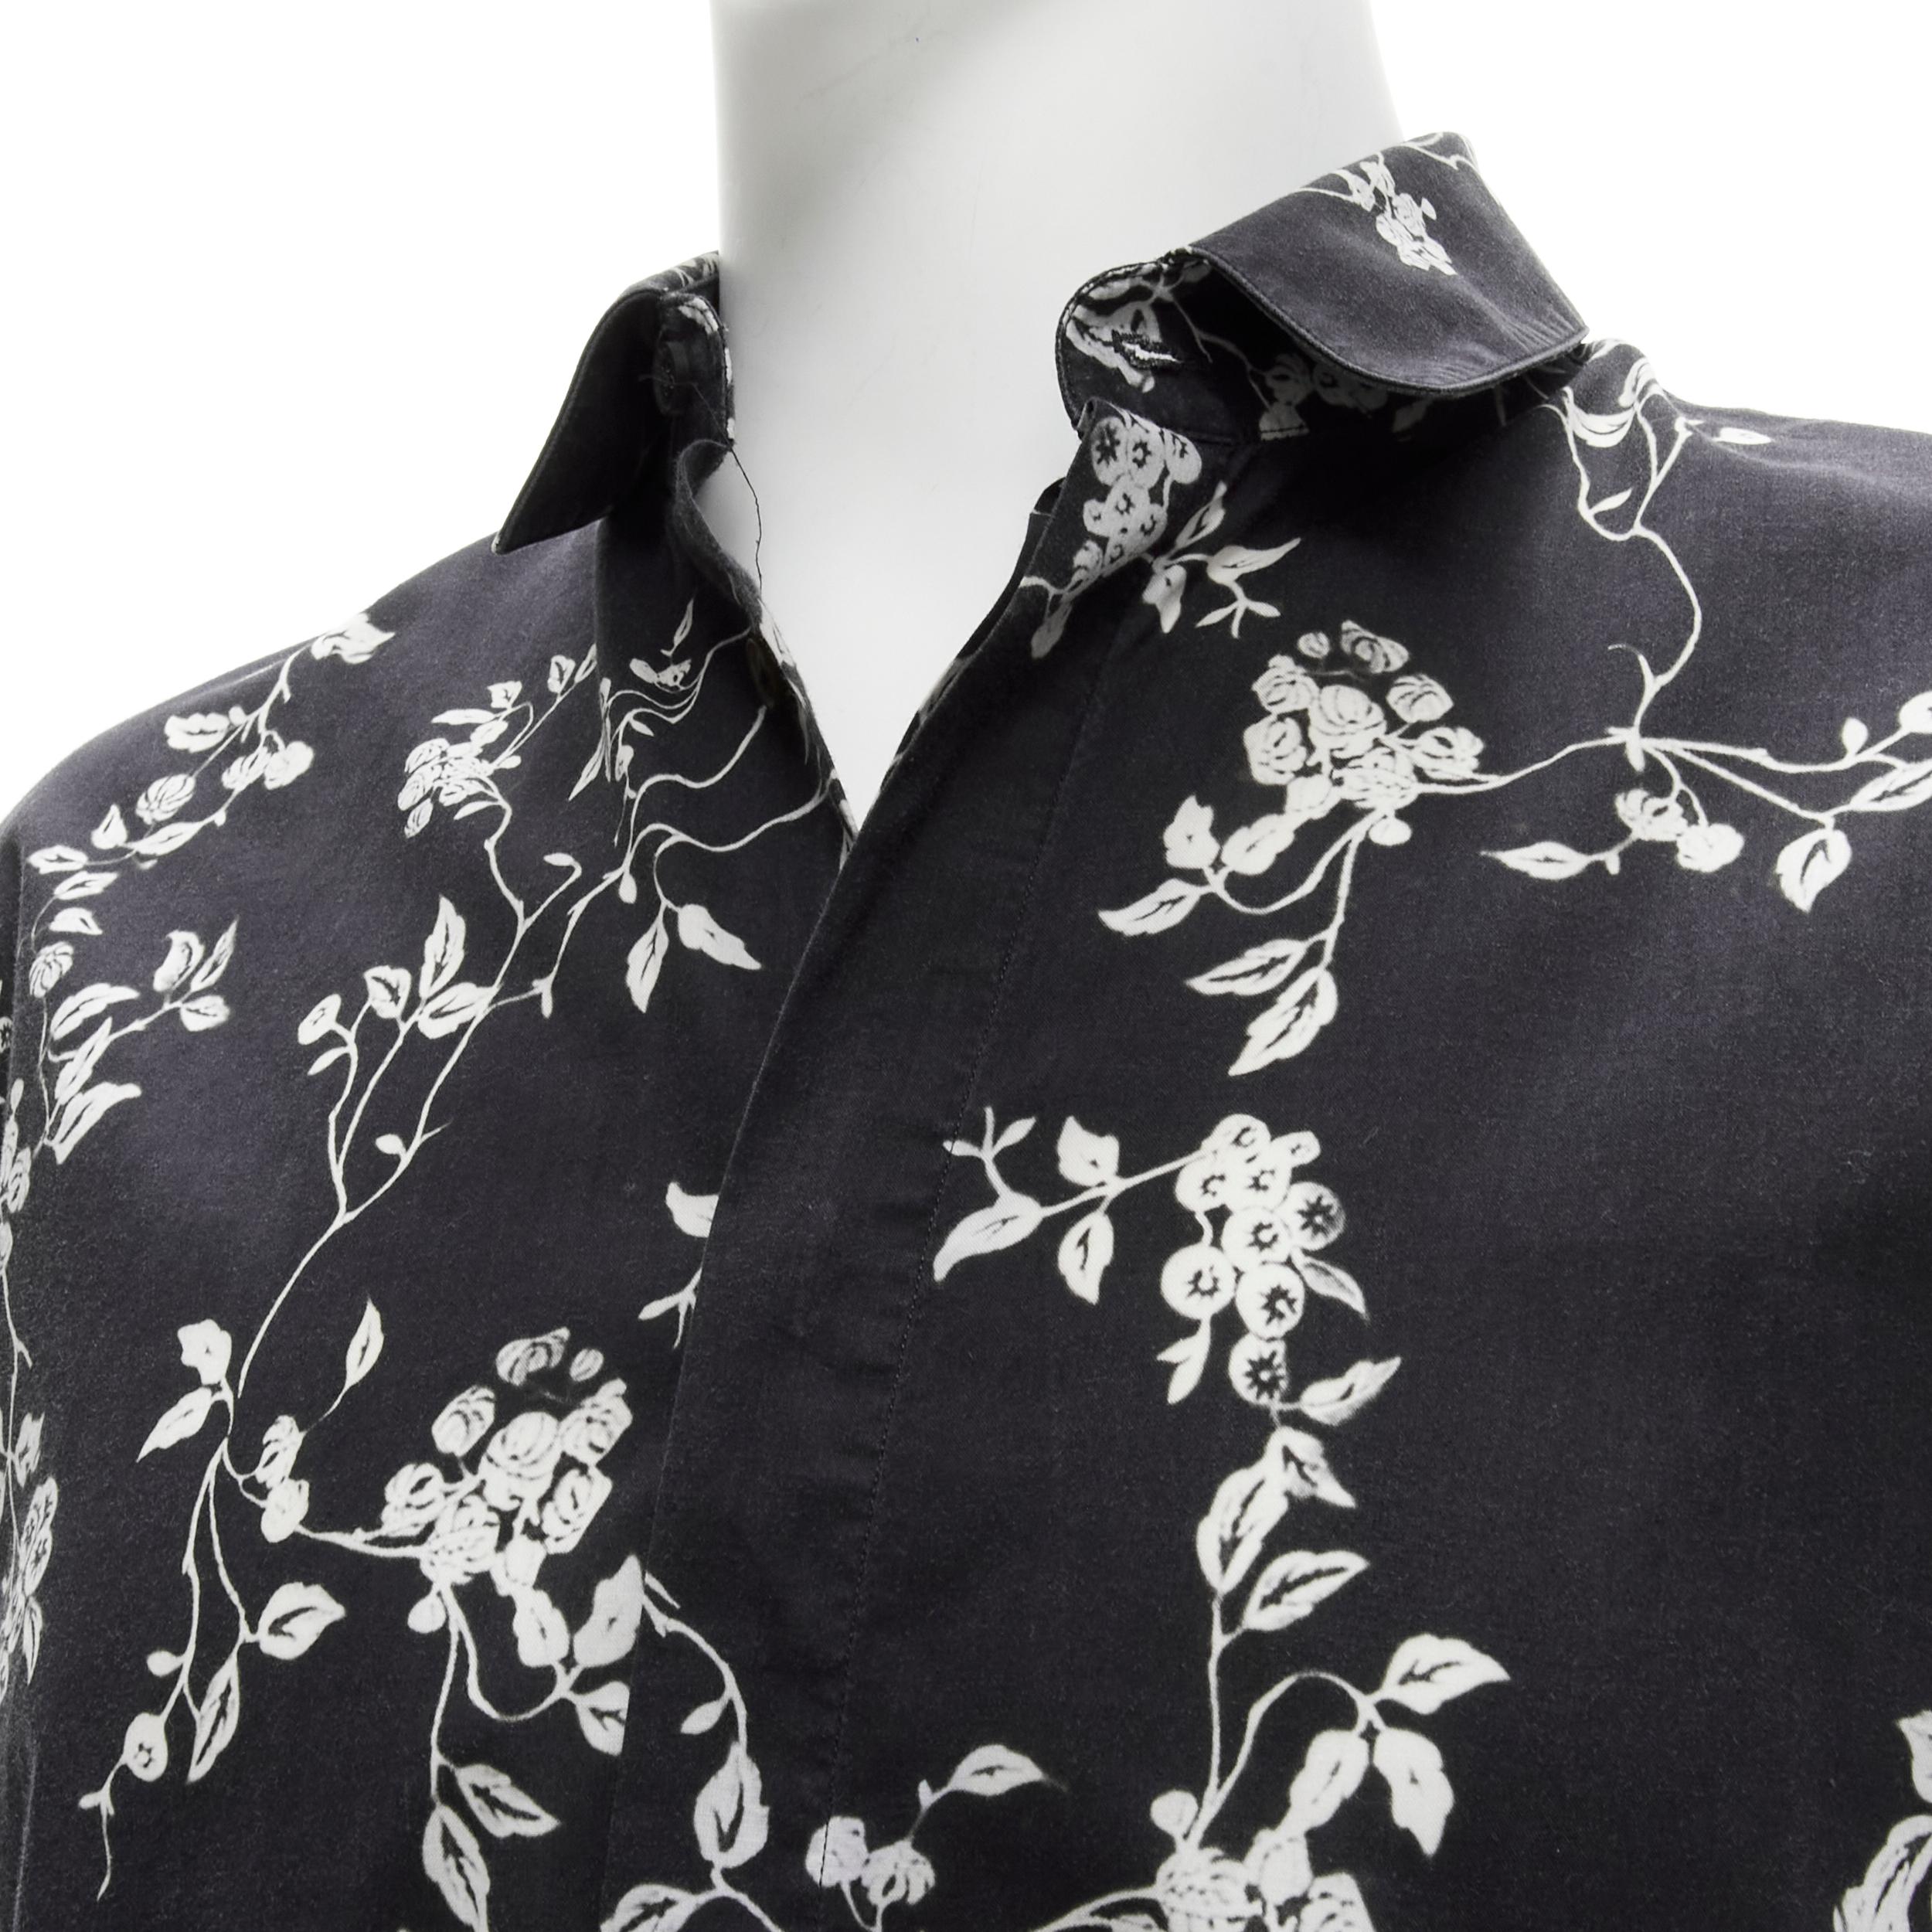 HAIDER ACKERMANN black white floral print long sleeve cotton shirt S 
Reference: CNLE/A00169 
Brand: Haider Ackermann 
Material: Cotton 
Color: Black 
Pattern: Floral 
Closure: Button 

CONDITION: 
Condition: Good, this item was pre-owned and is in